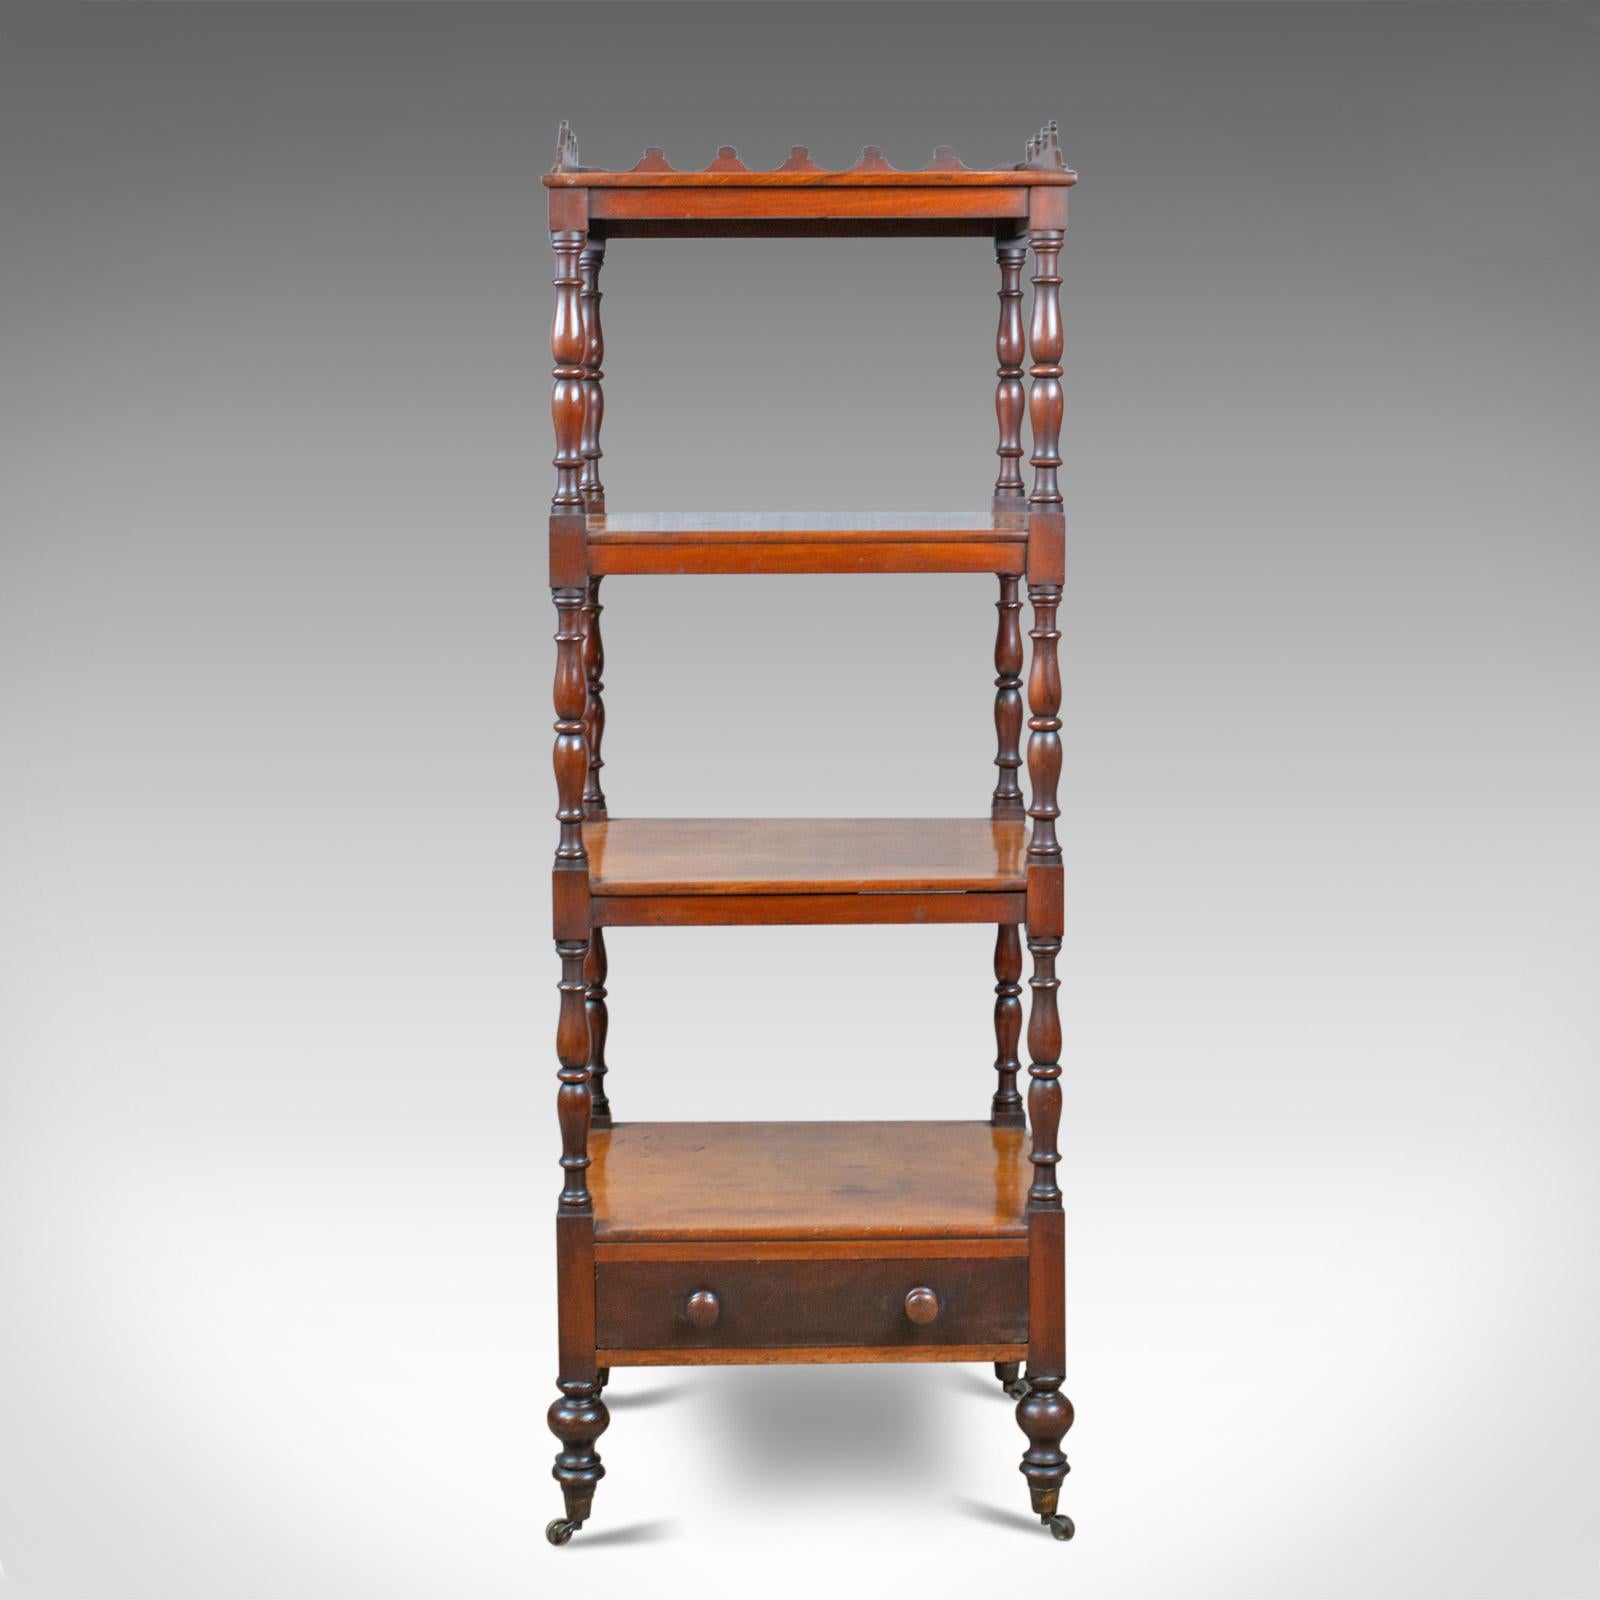 This is an antique whatnot, an English, mahogany, four-tier, Regency display stand dating to the early 19th century, circa 1820.

Delightful, rich, russet tones to the select mahogany
Good consistent colour in the wax polished finish
Grain